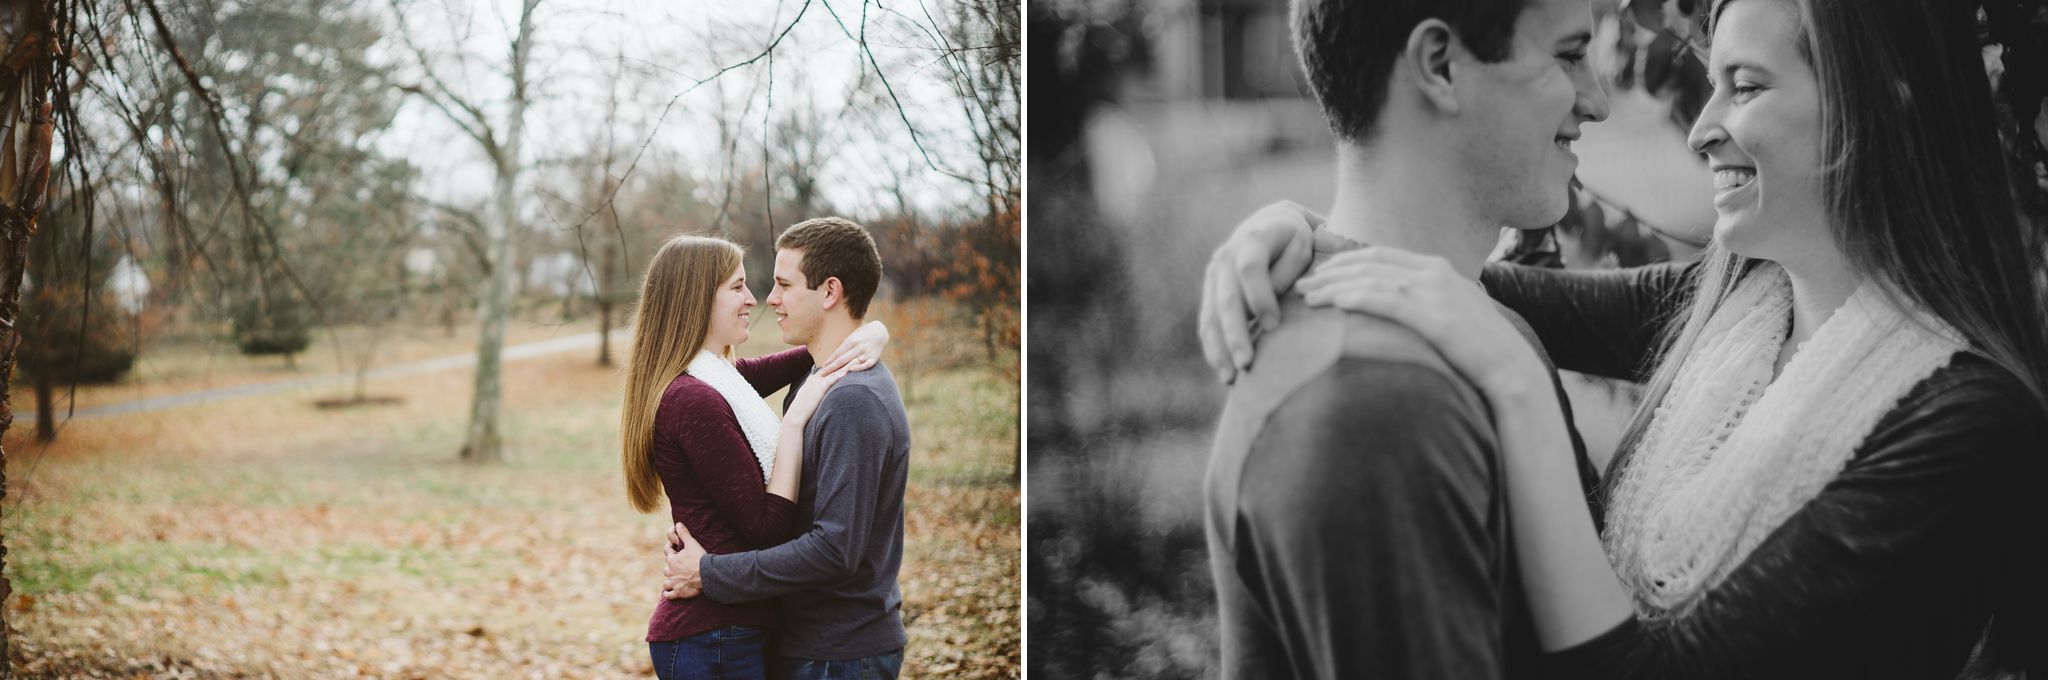 A couple embraces and looks each other in the eyes at Blackburn Park during their Engagement Session